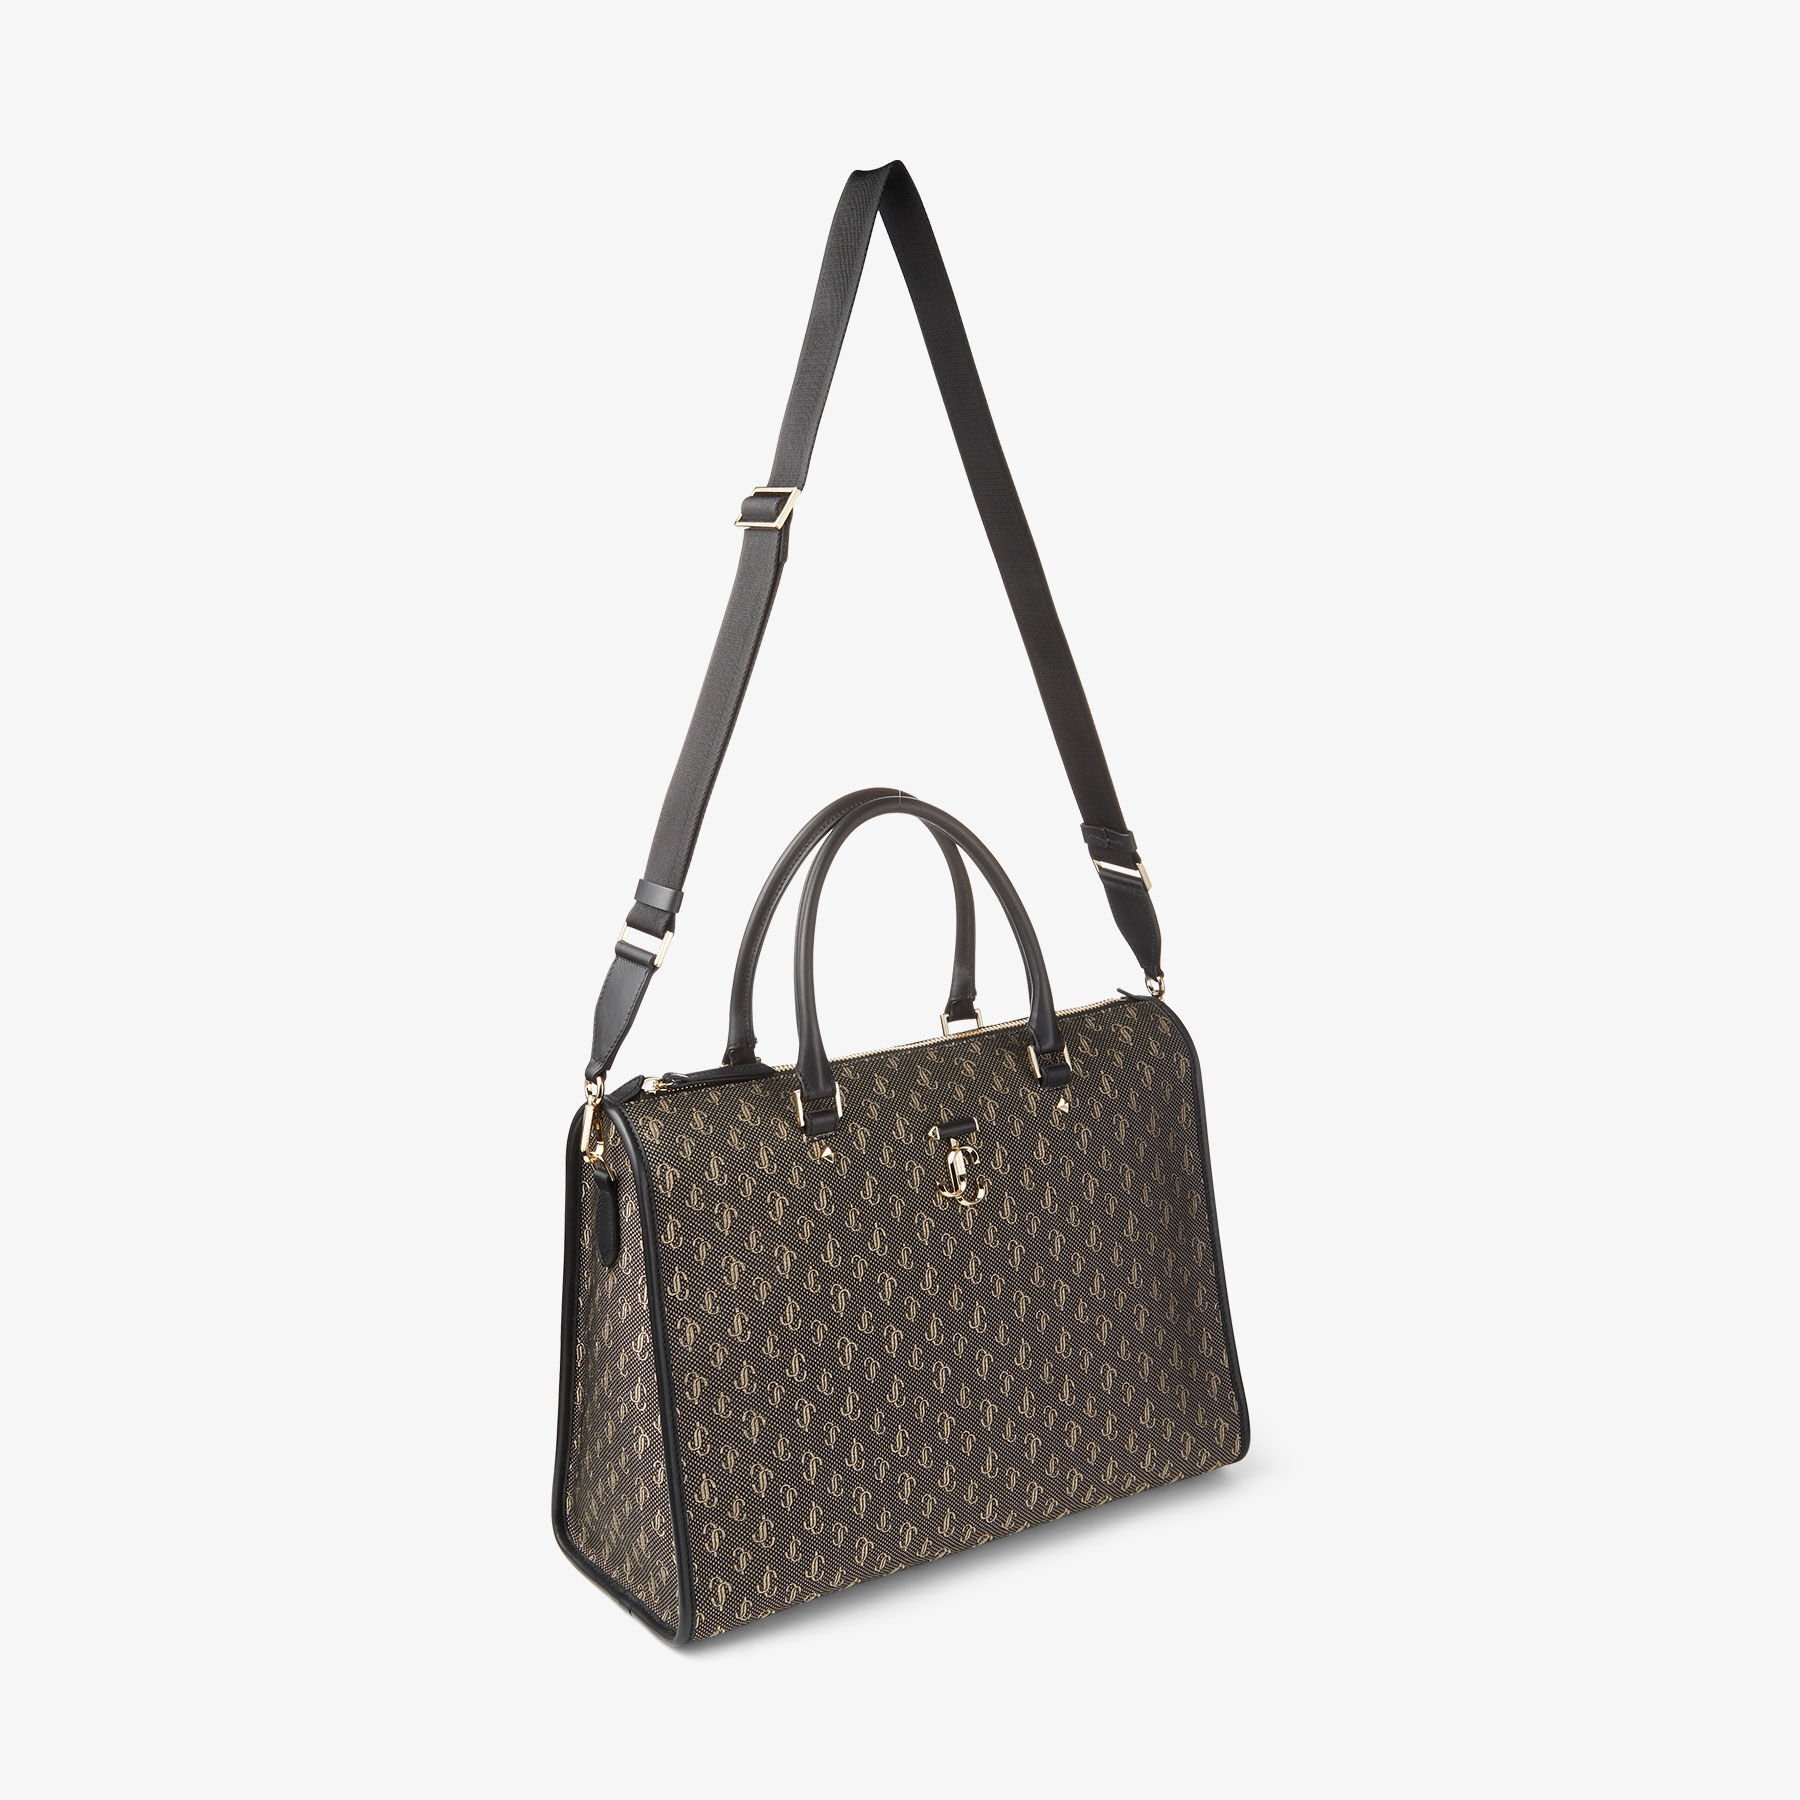 Webb Top Handle
Black and Gold JC Monogram Jacquard Lurex and Soft Shiny Calf Leather Top Handle Bag - 4